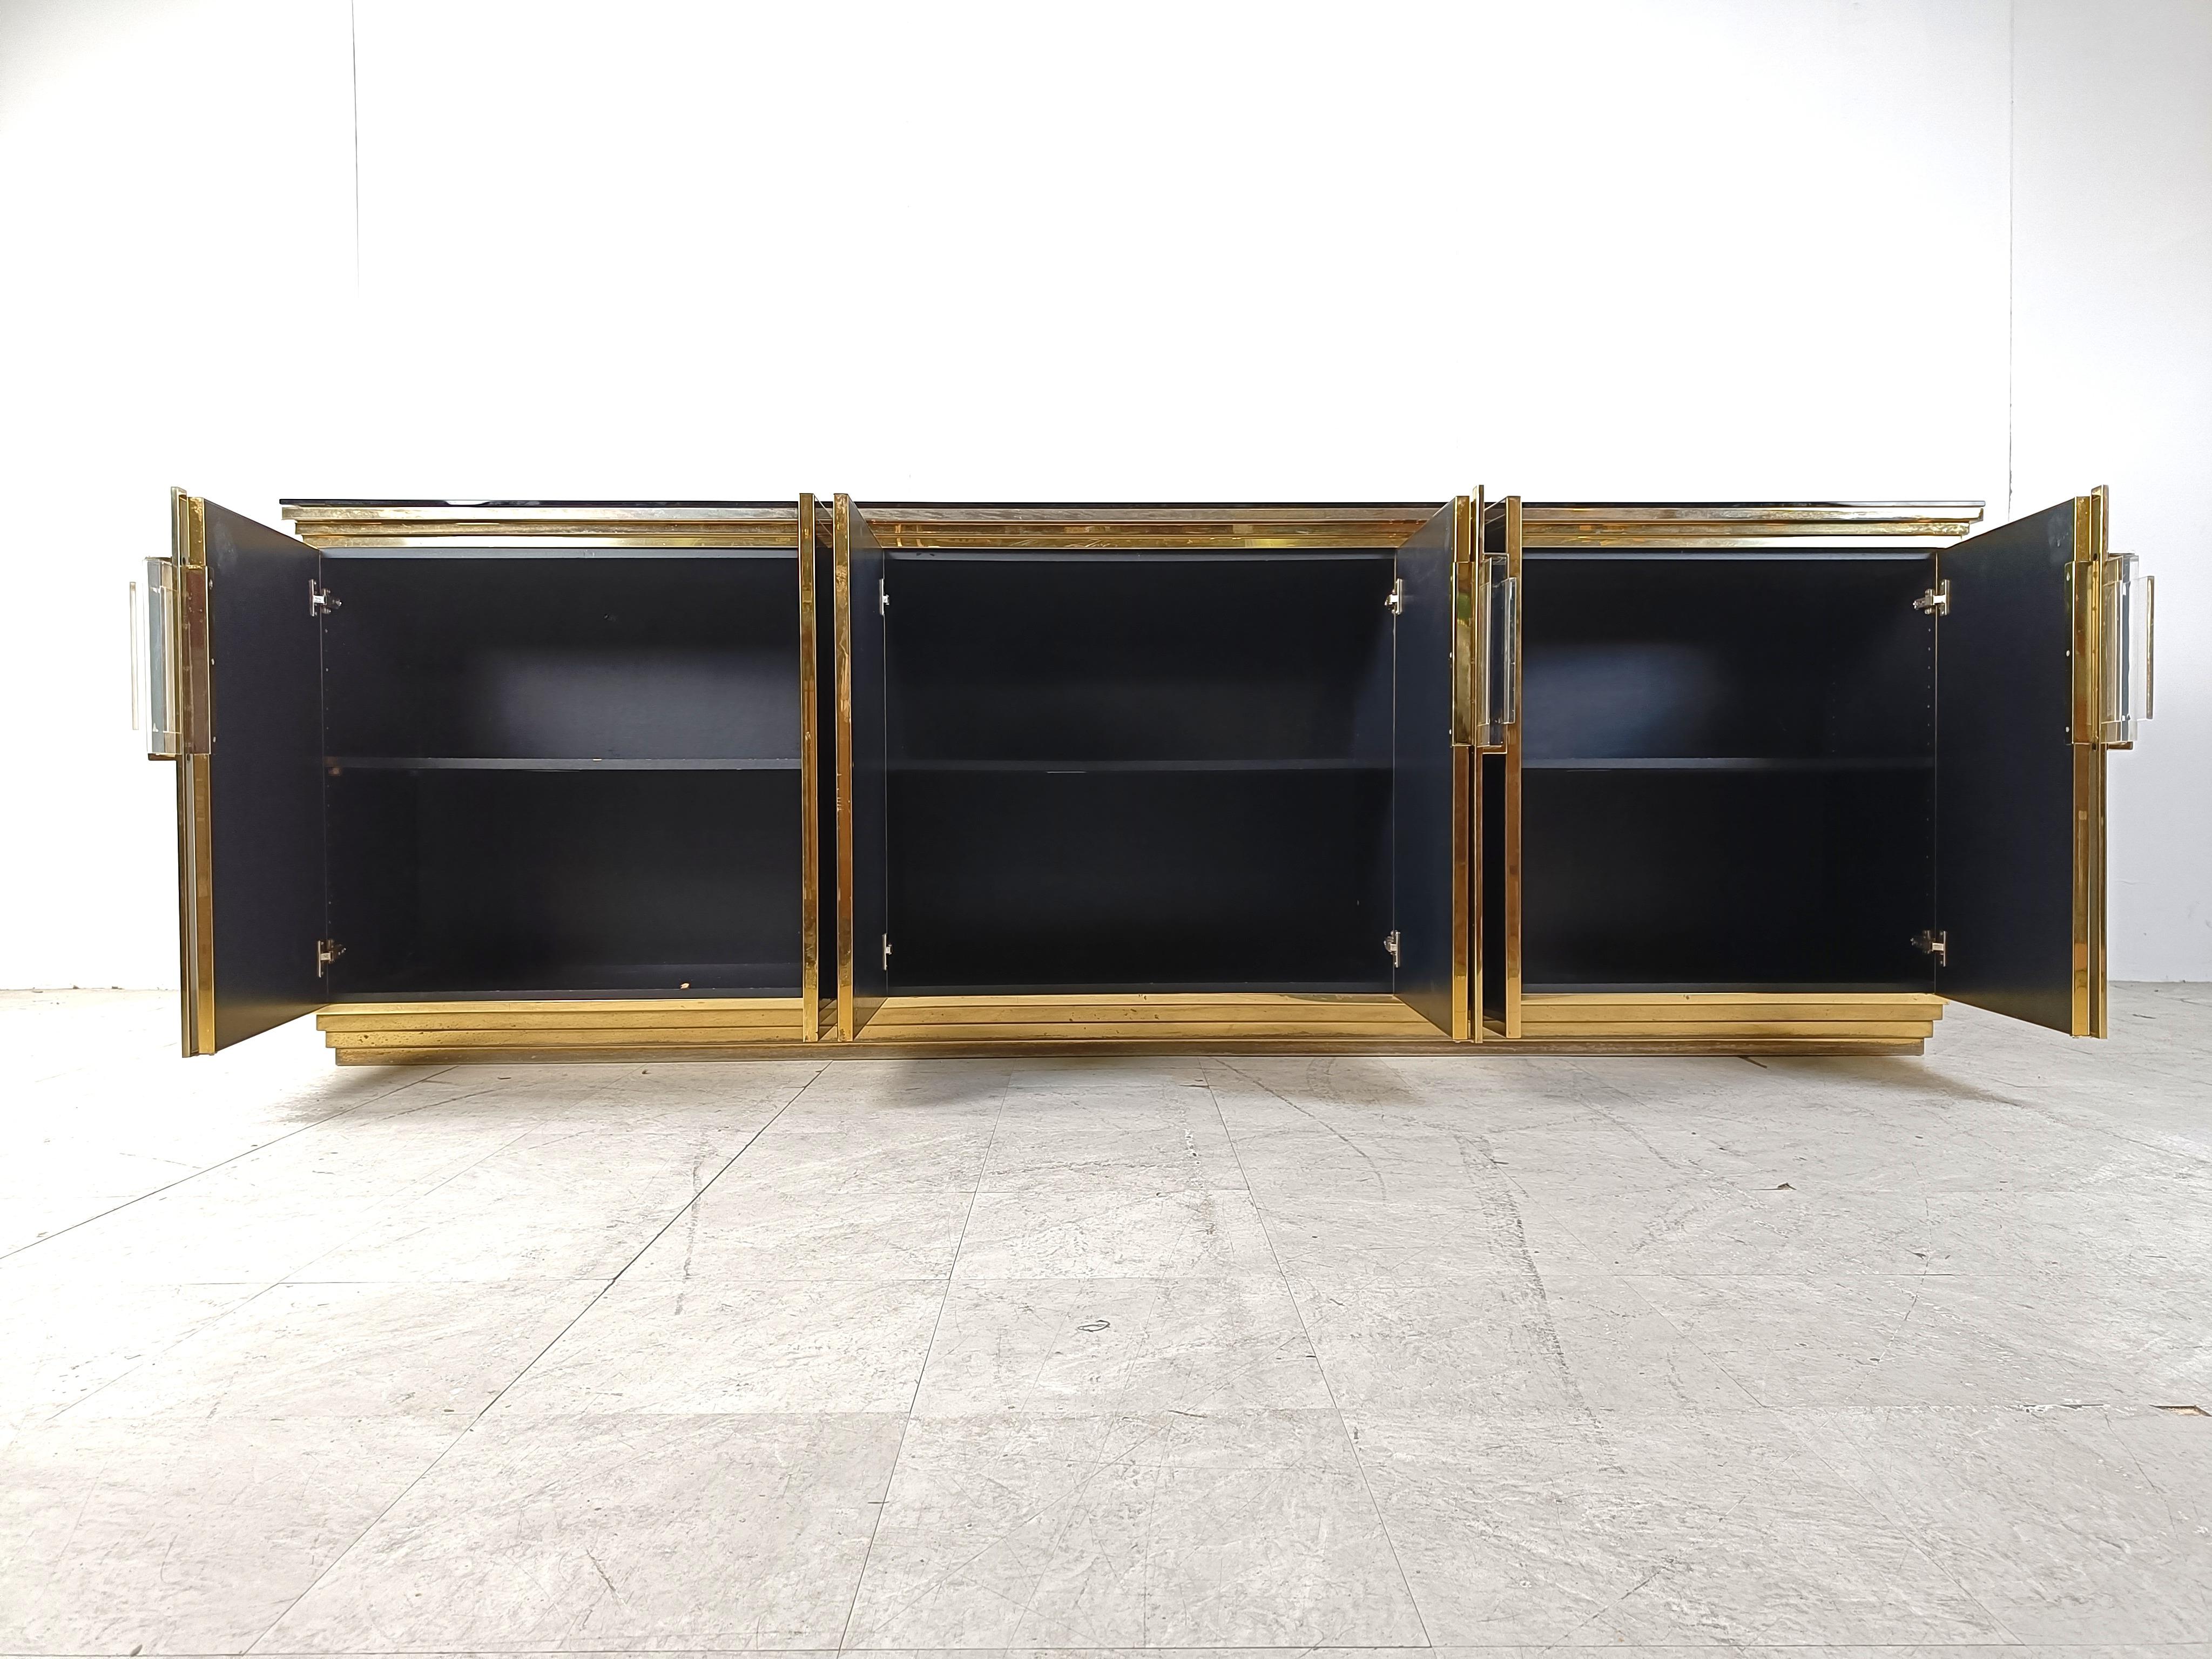 Luxurious black lacquer credenza with brass details and lucite  handles and a black glass top.

The sideboard has 6 doors which reveal a lot of storage space.

Beautiful piece with nice patina on brass.

1980s - France

Dimensions:
Height: